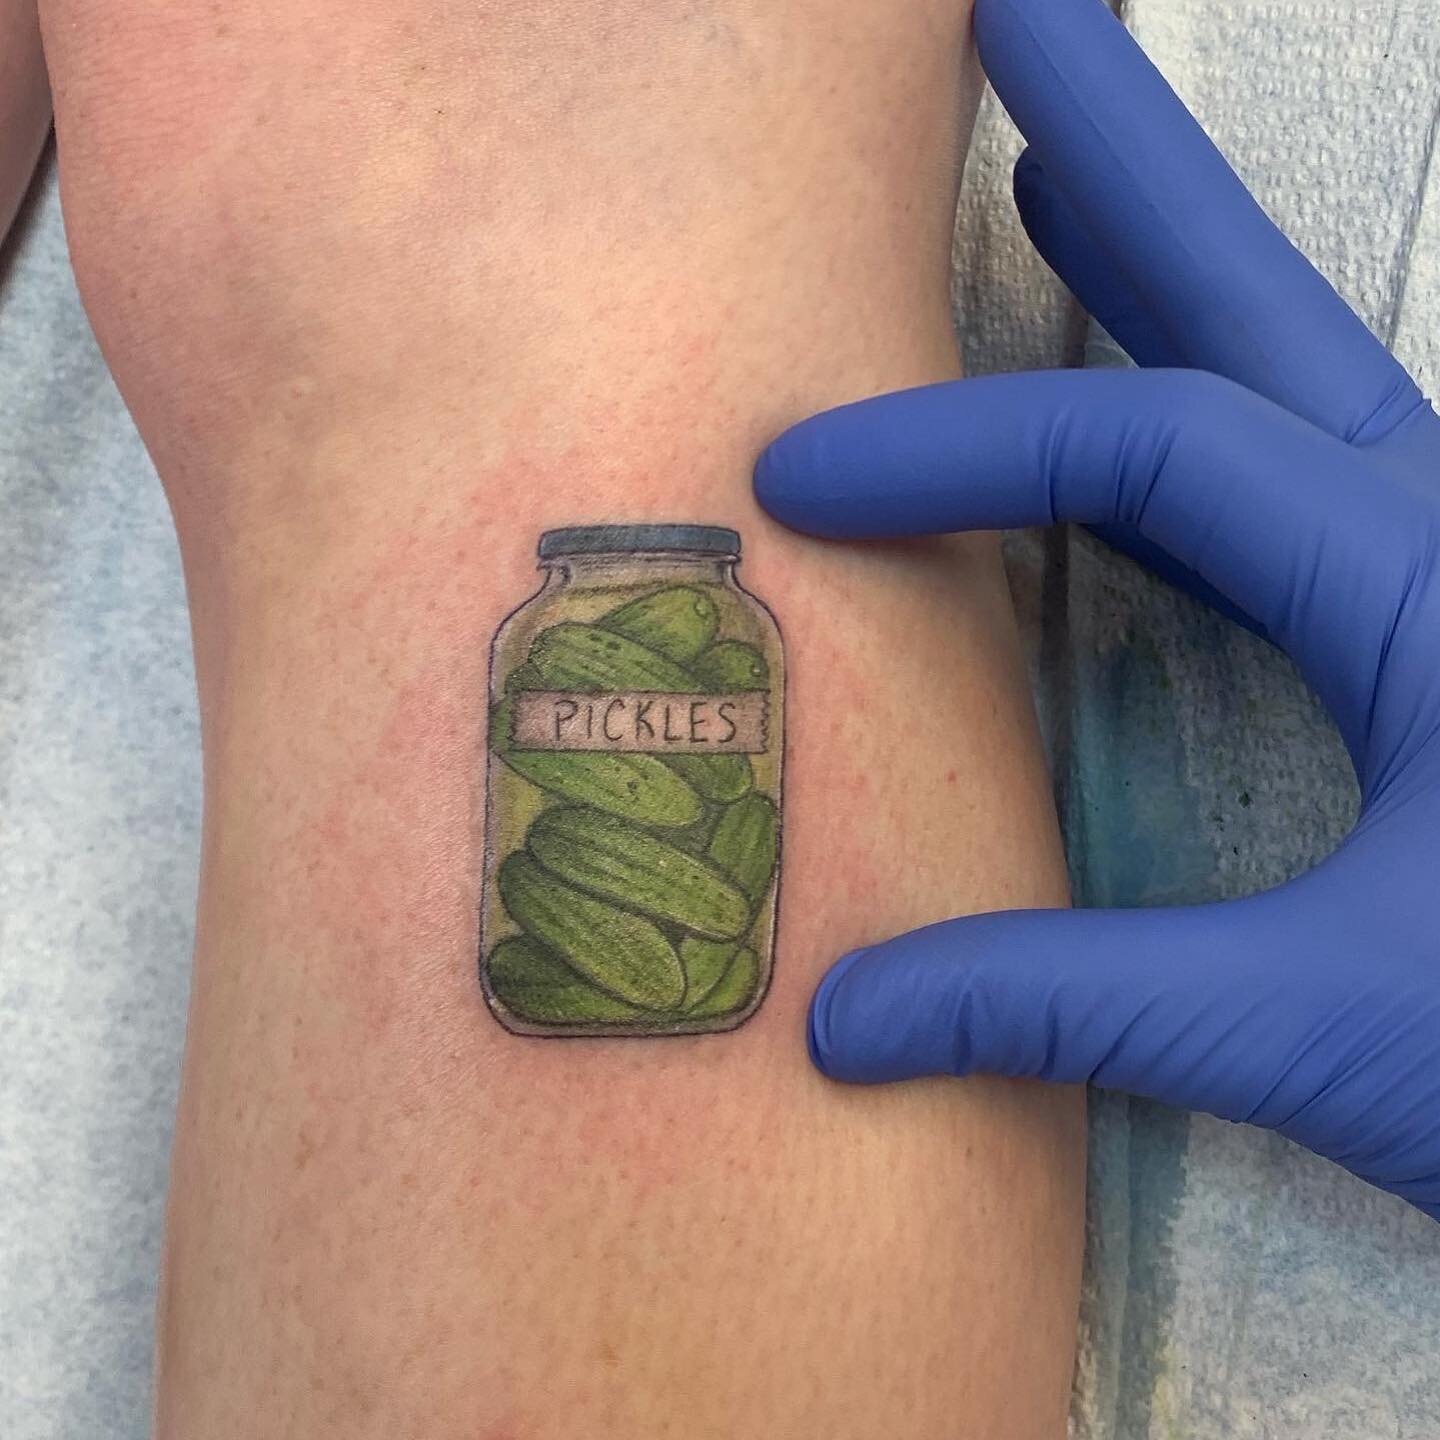 Tiny, tiny jar of pickles by Emily @emilybee_art To book or inquire please email us at gypsykingstattoos@gmail.com .
.
.
.
.
. 
#tattoos #southeastmichigan #southeastmi #mitattooartist #detroittattooartist #MItattoo #tattooshop #pickles #tinytattoo #